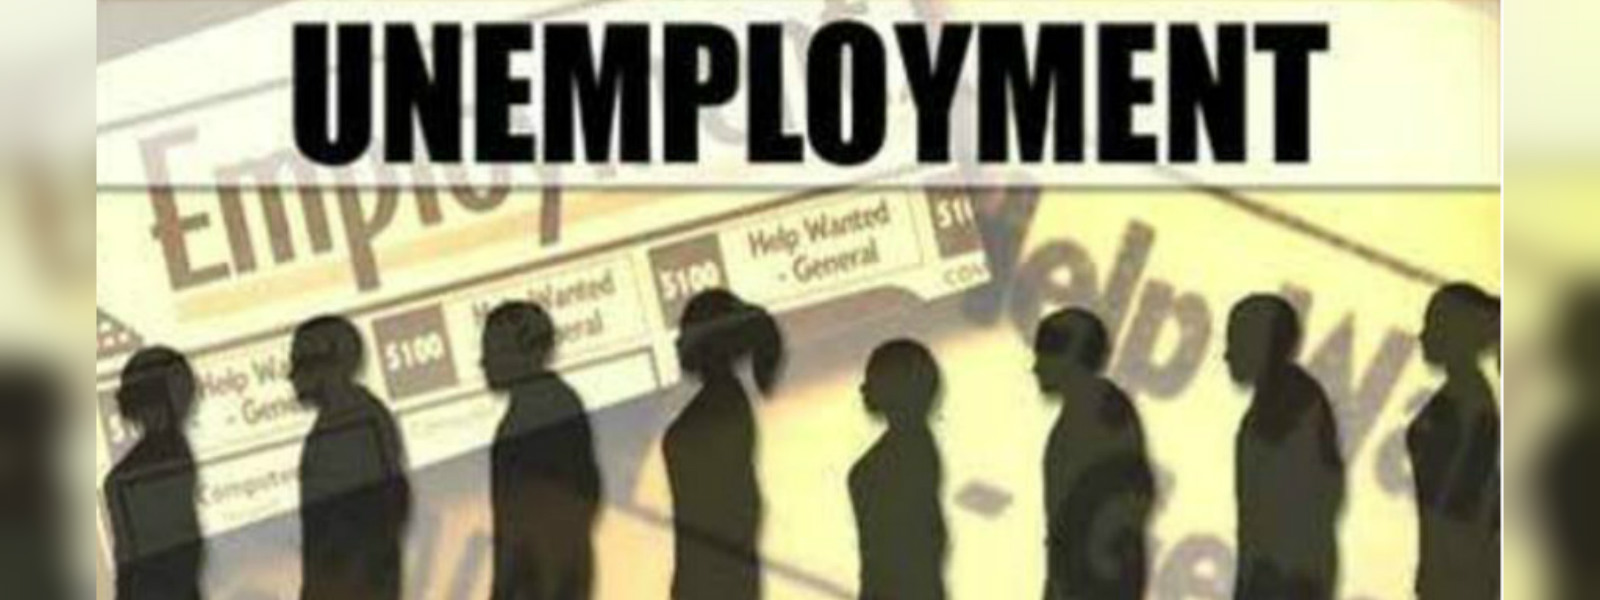 4.4% unemployment rate in 2018